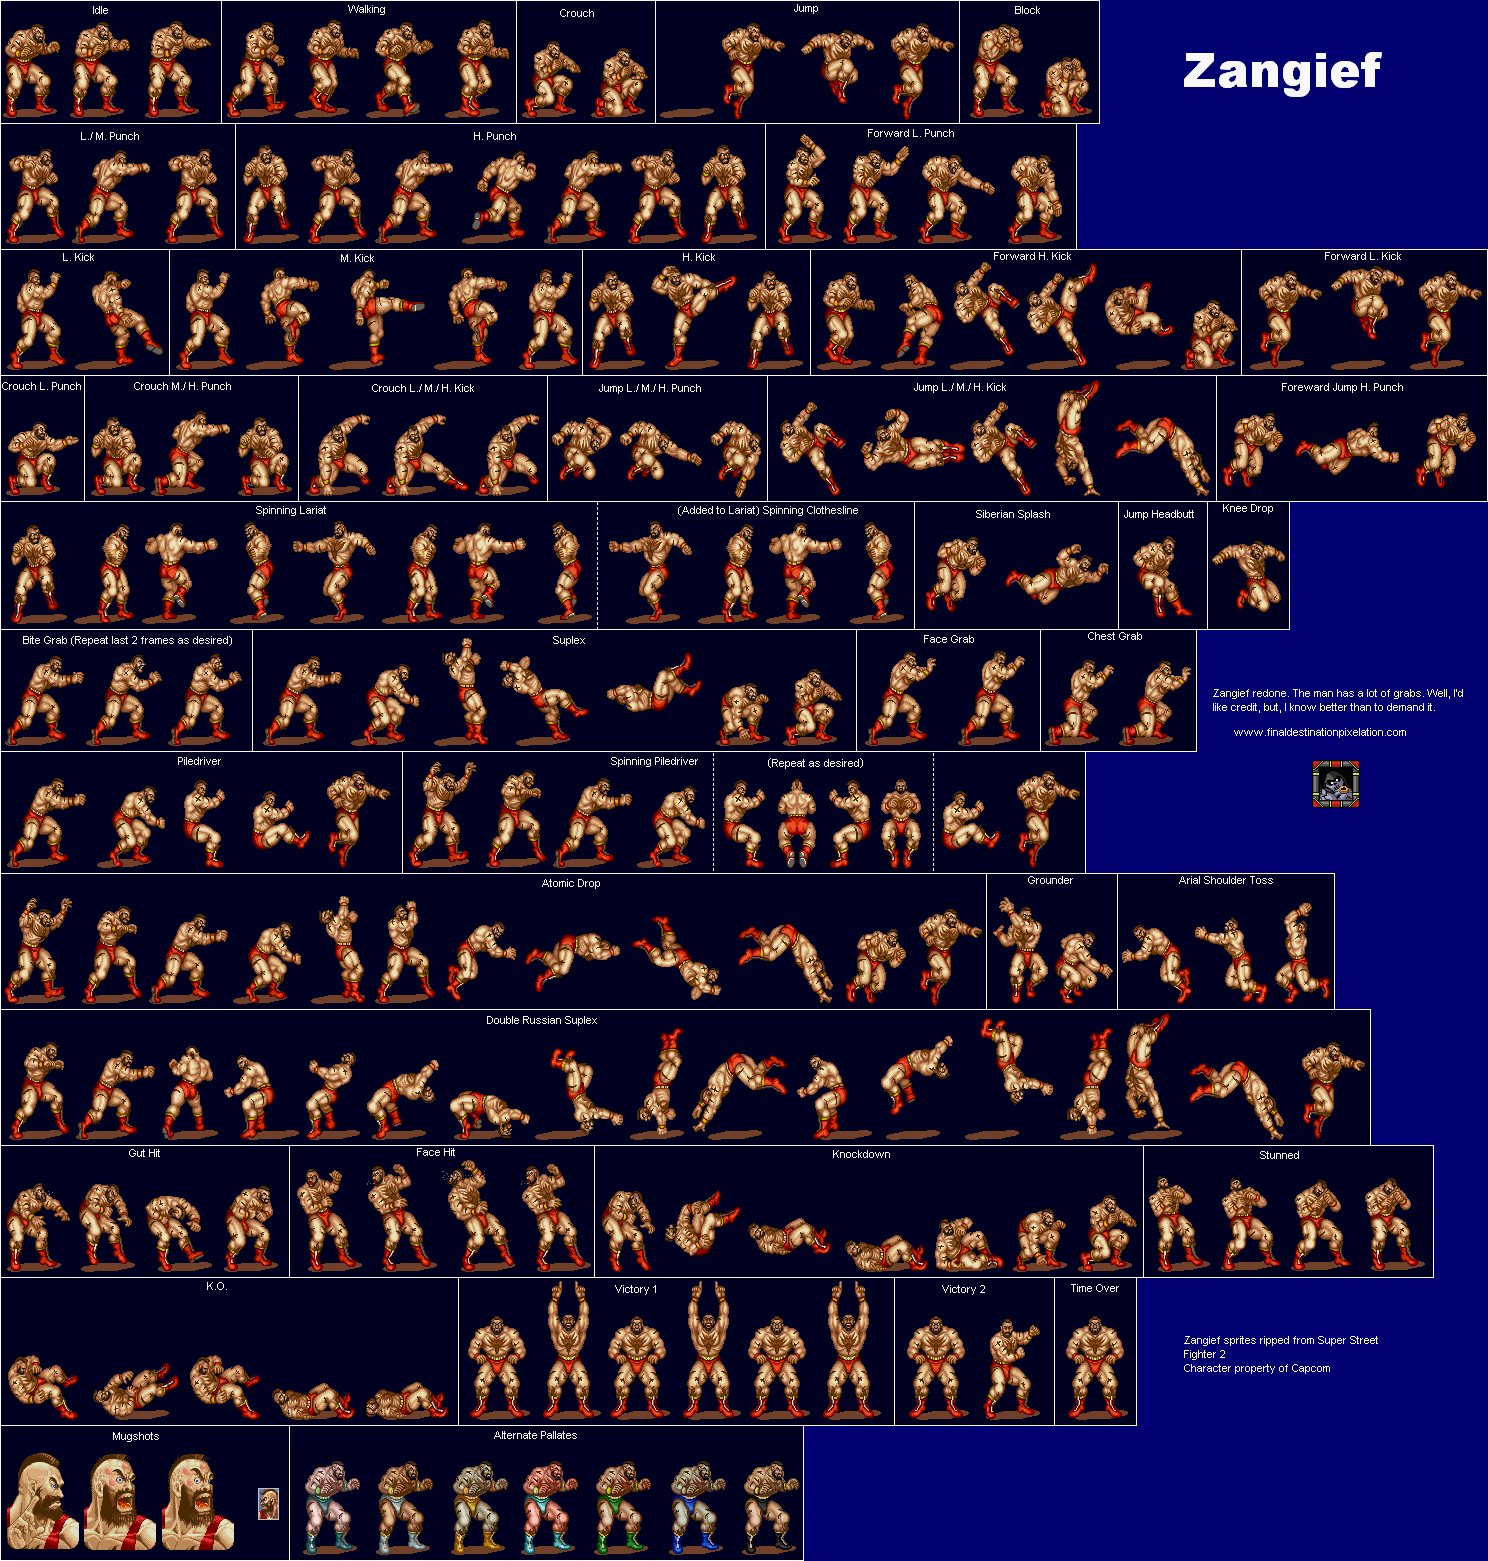 Super Street Fighter II: The New Challengers - Zangief